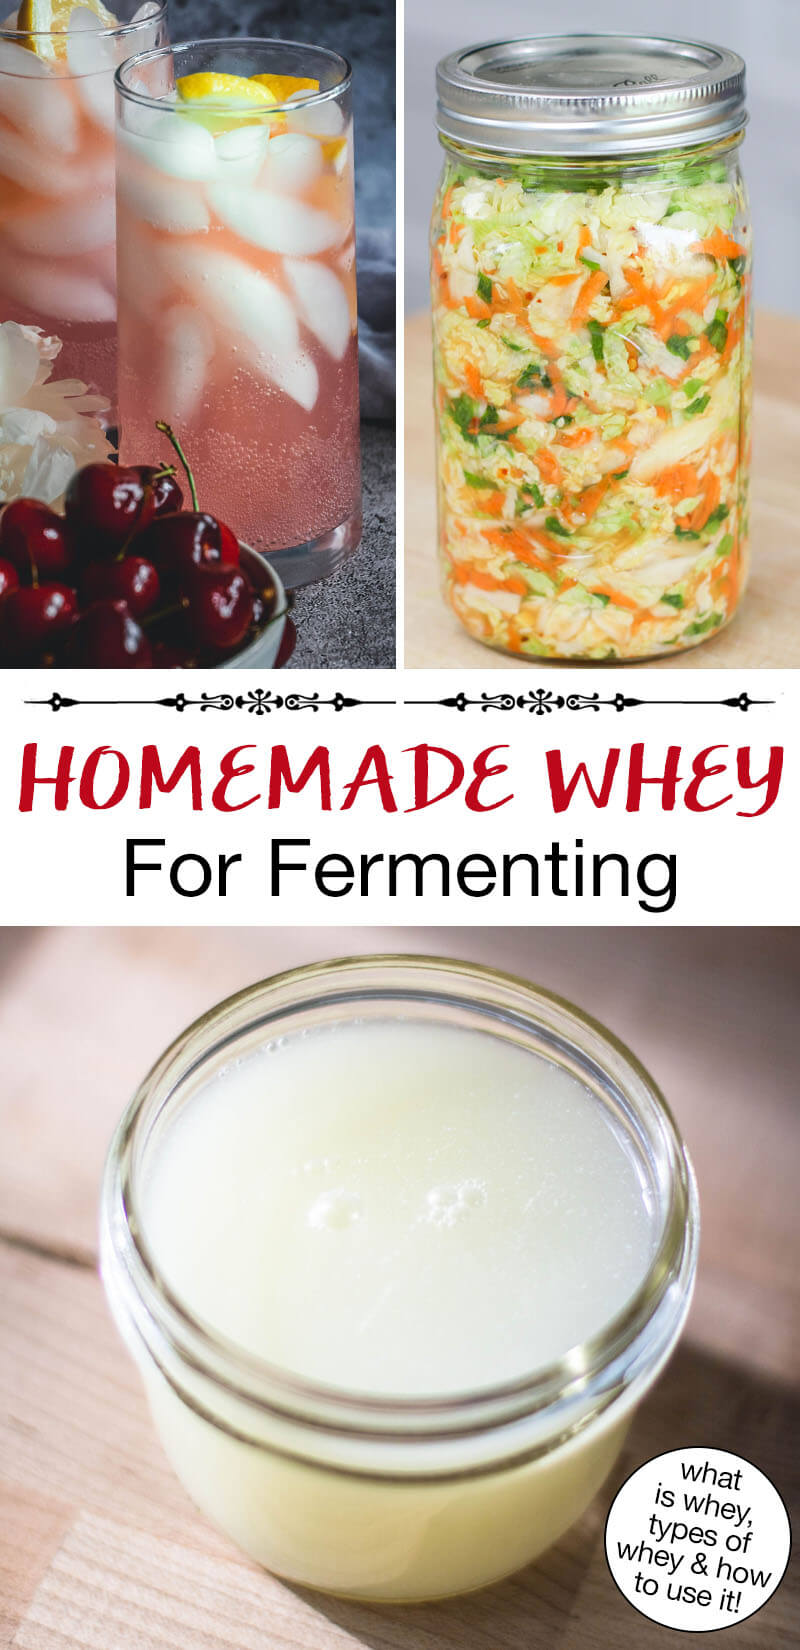 Photo collage of whey, kimchi made with whey, and homemade natural soda. Text overlay says: "Homemade Whey For Fermenting (what is whey, types of whey & how to use it)"